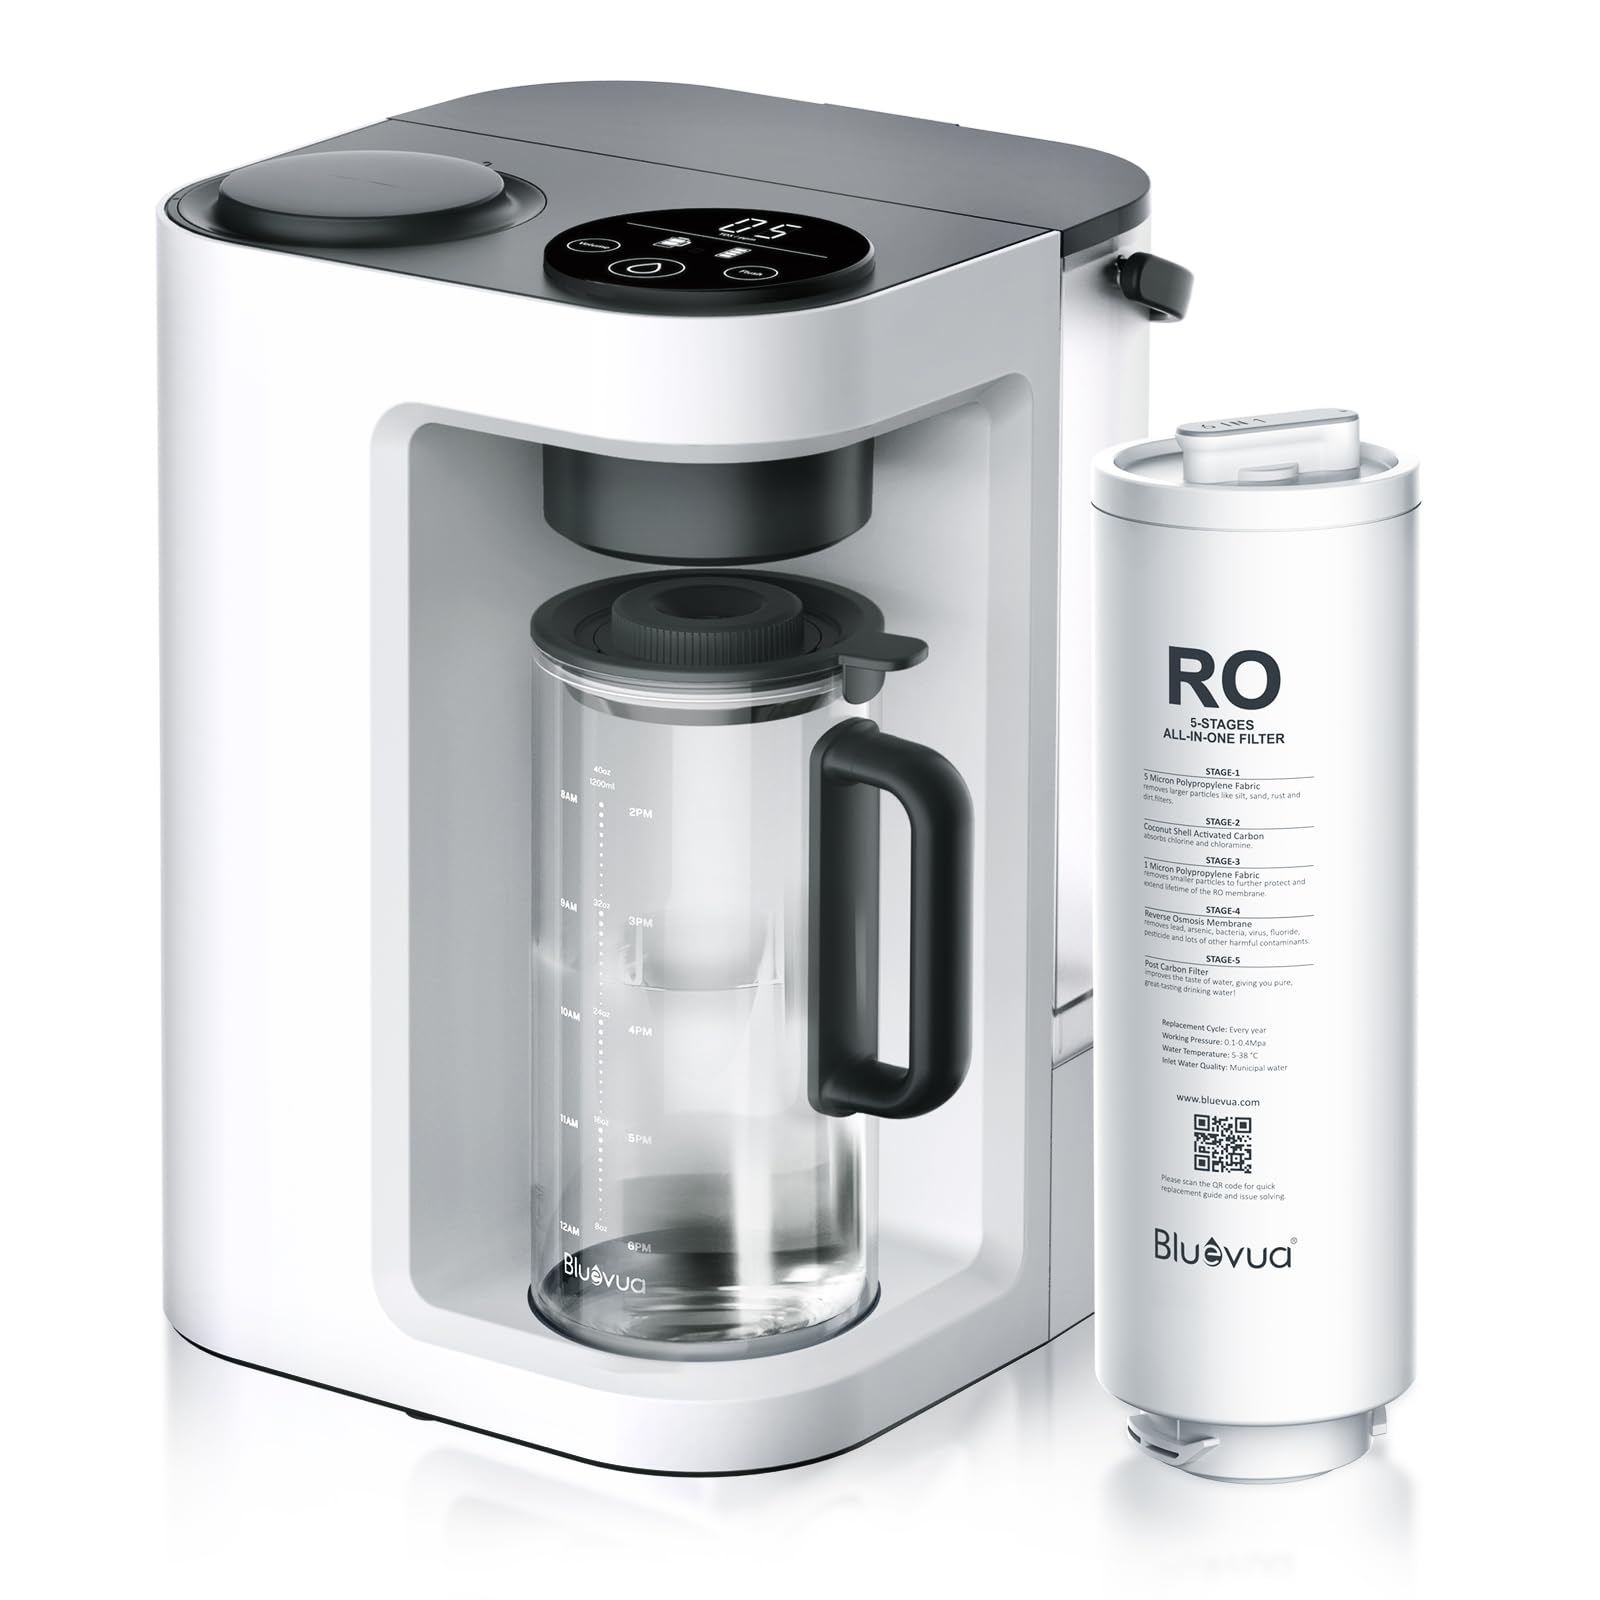 Bluevua RO100ROPOT-LITE Countertop Reverse Osmosis Water Filter System, 5 Stage Purification, 3:1 Pure to Drain, Portable Water 